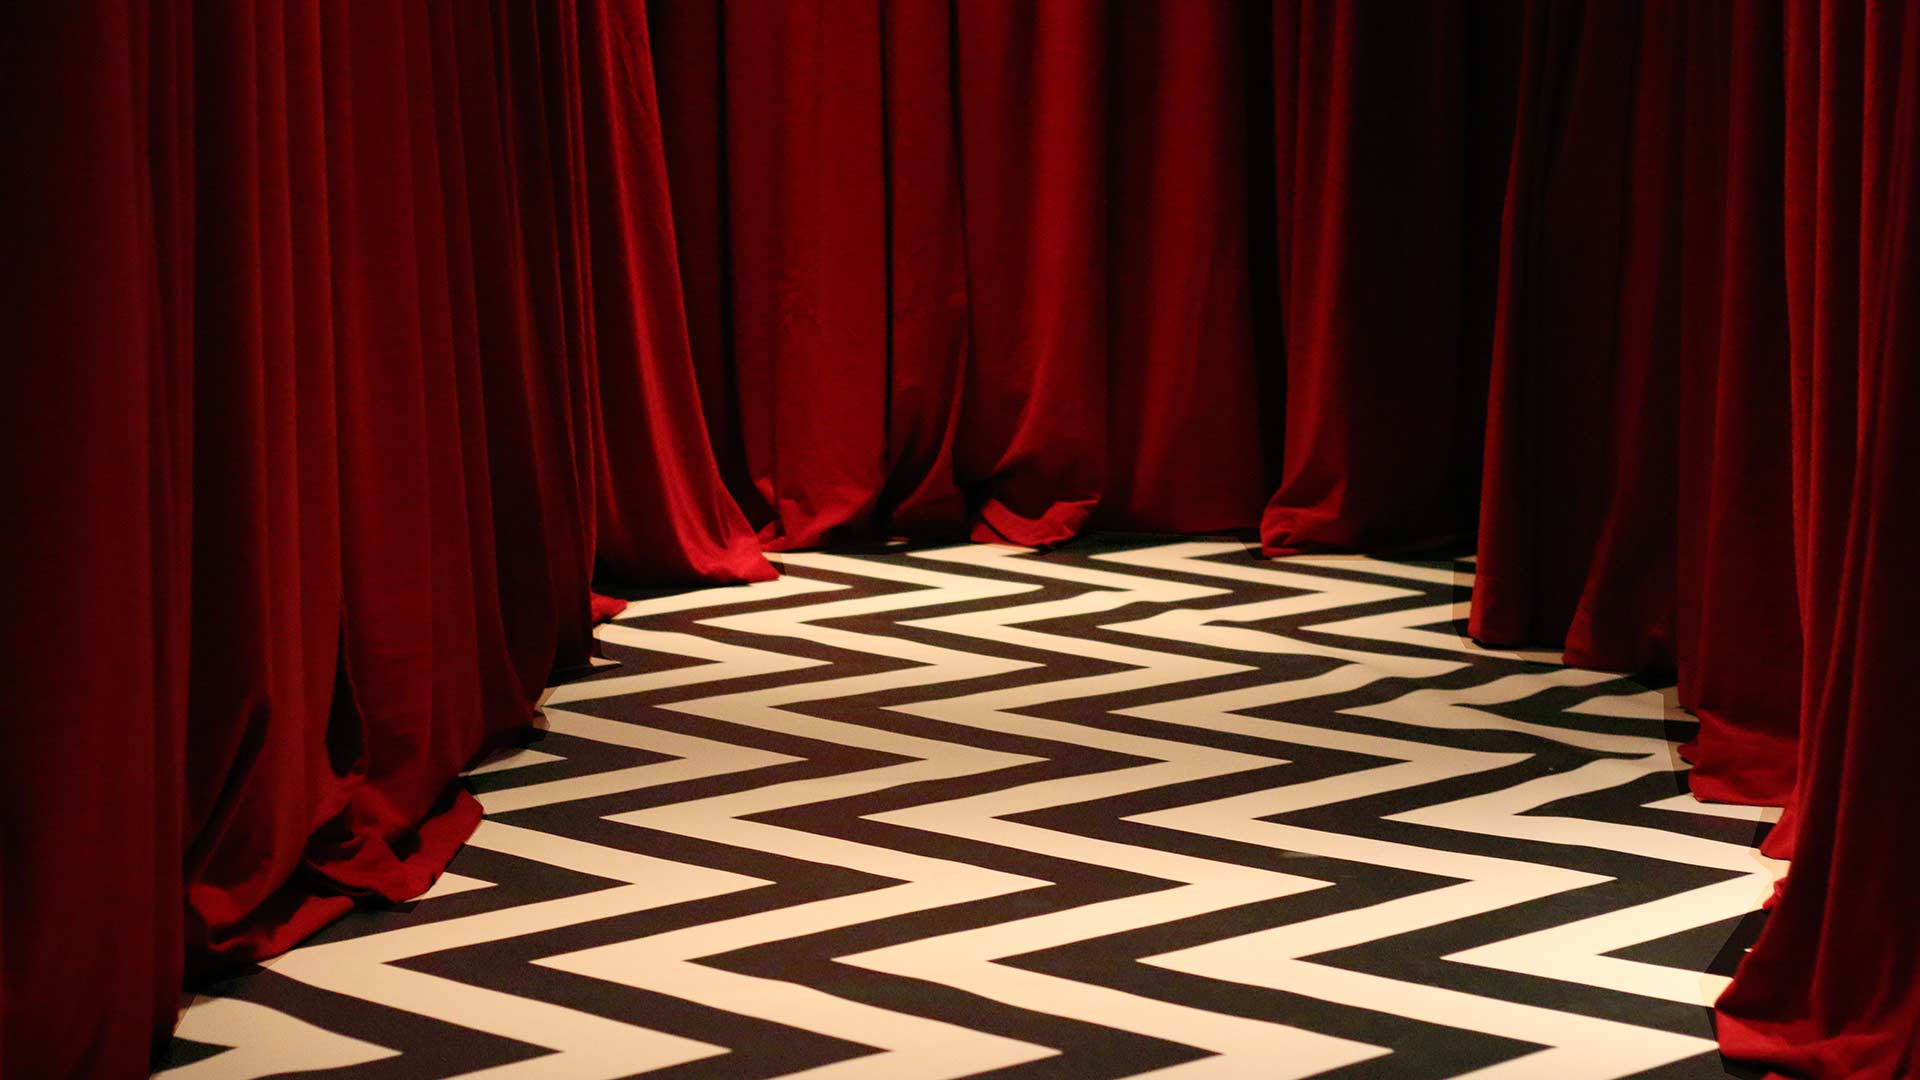 Twin Peaks Red Patterns Background